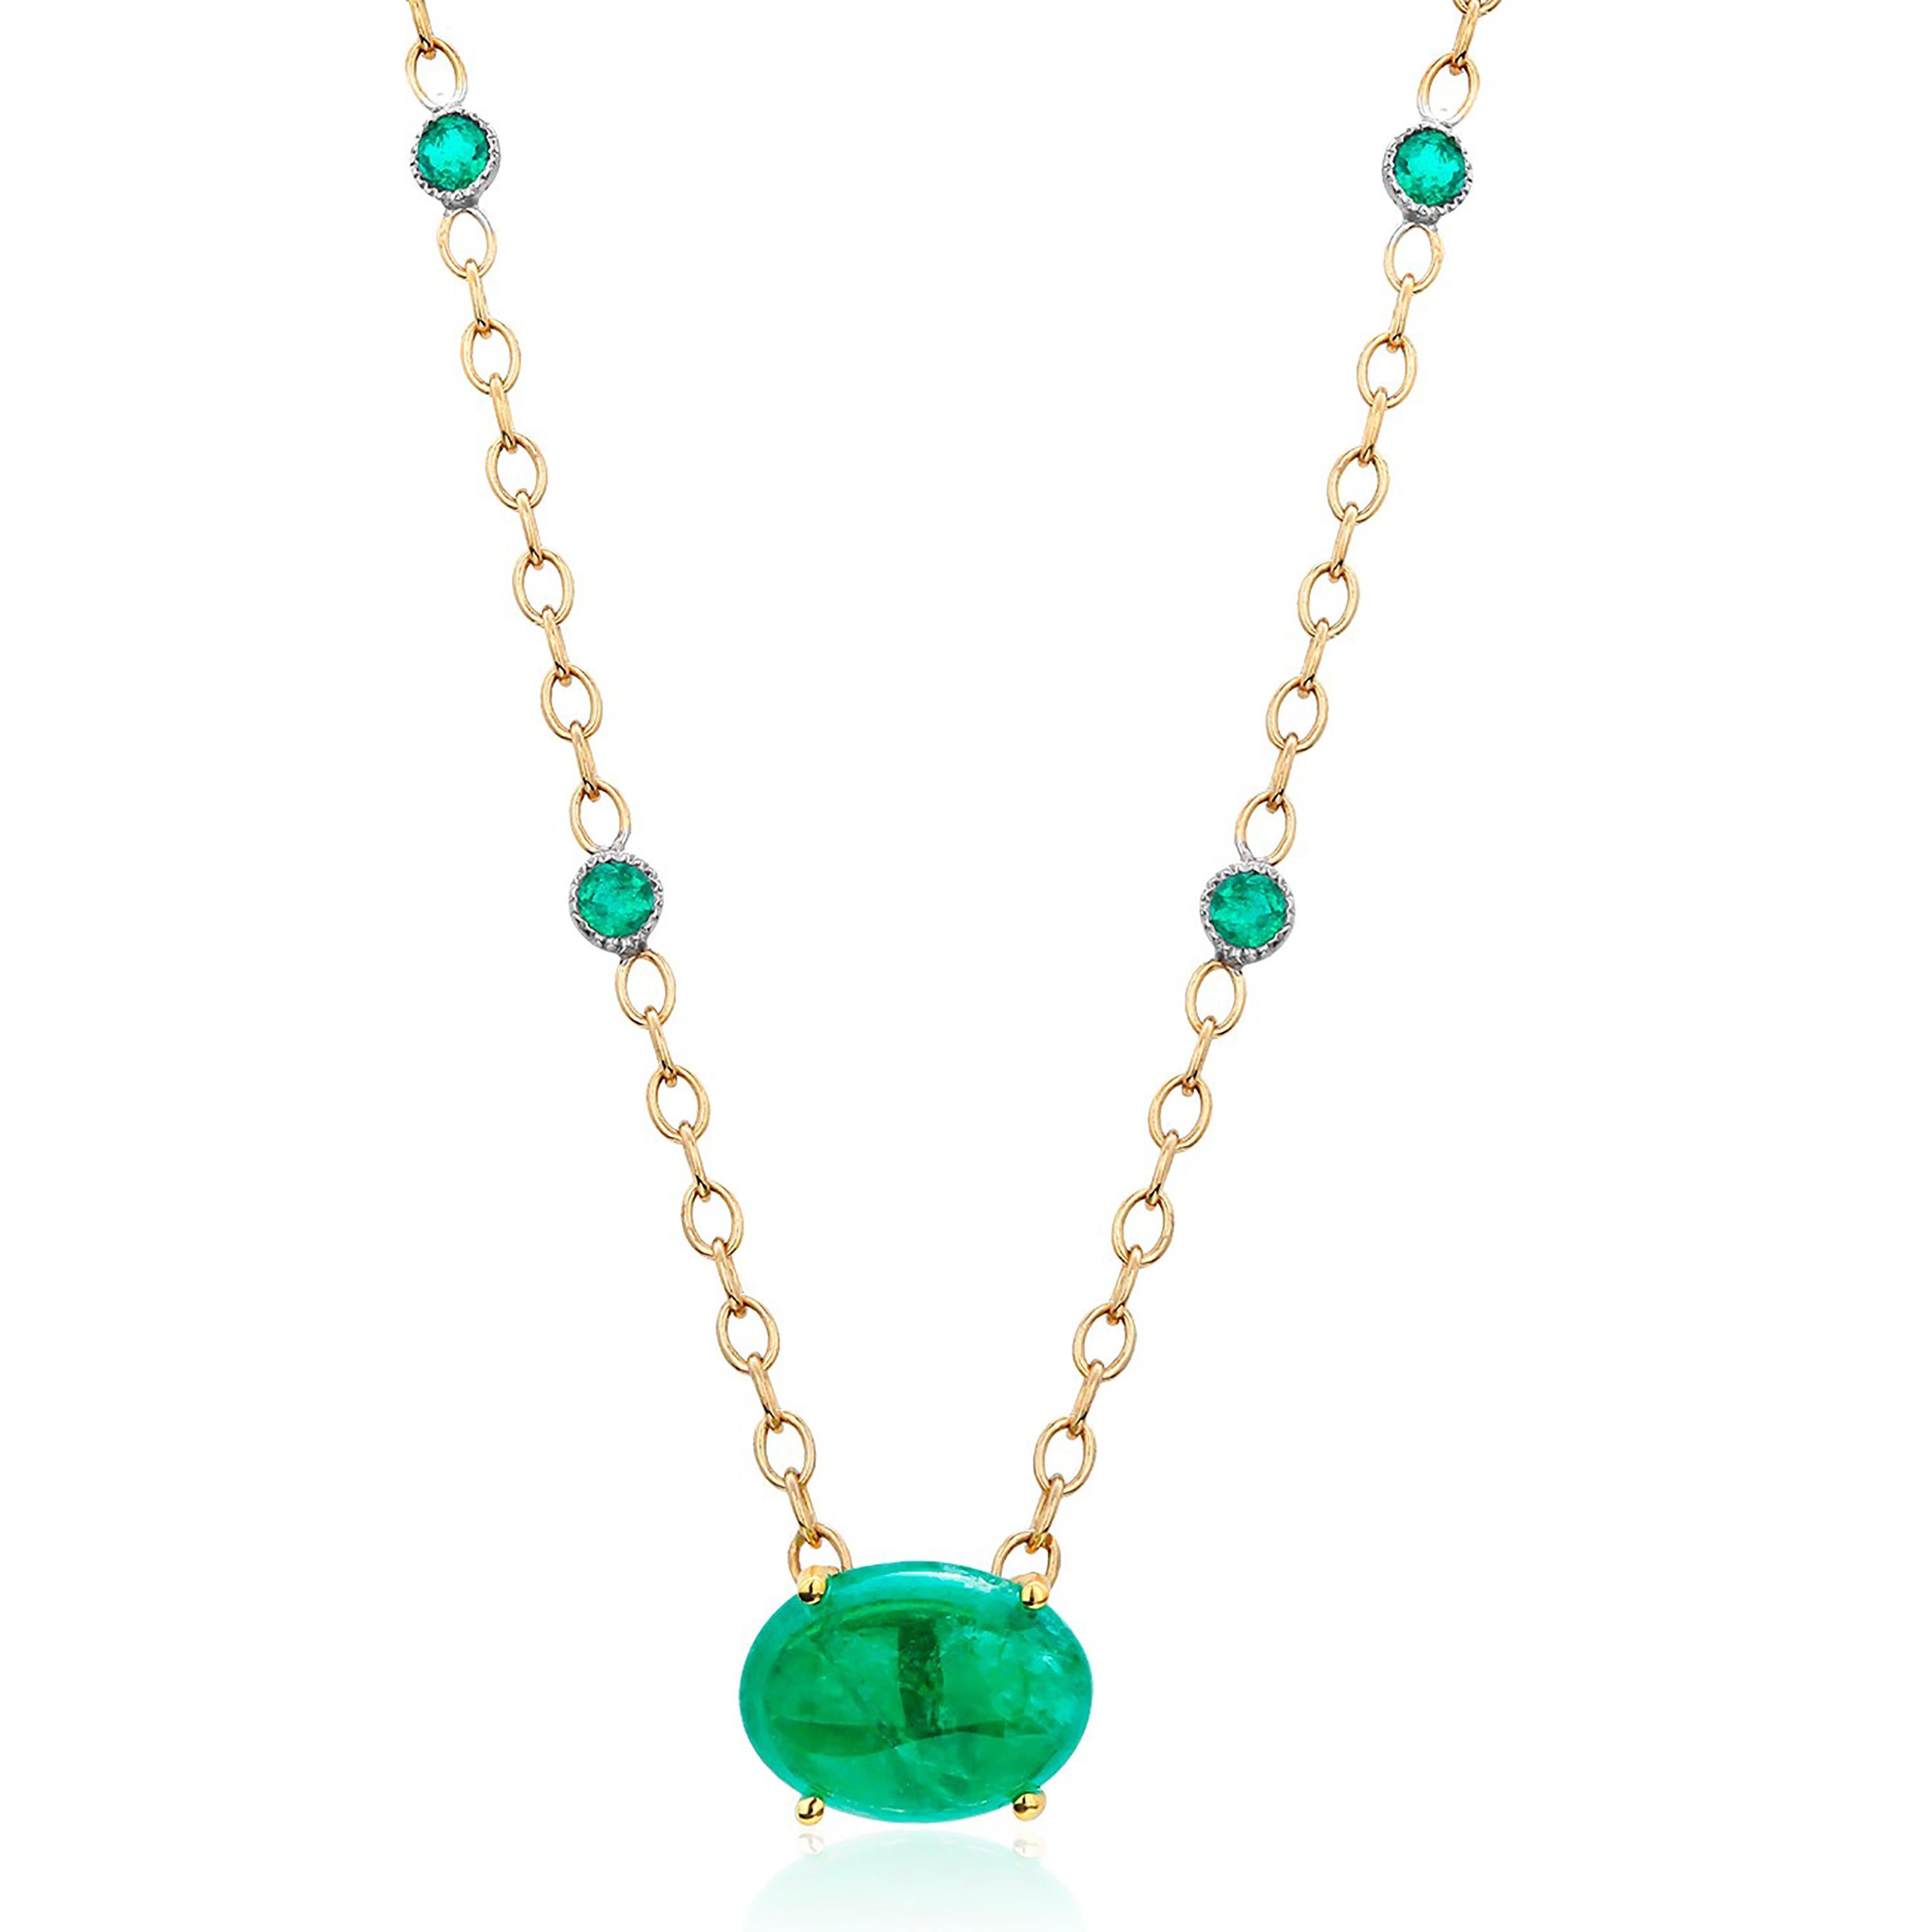 Modern Colombia Cabochon Emerald 18 Karat Yellow Gold Pendant Necklace